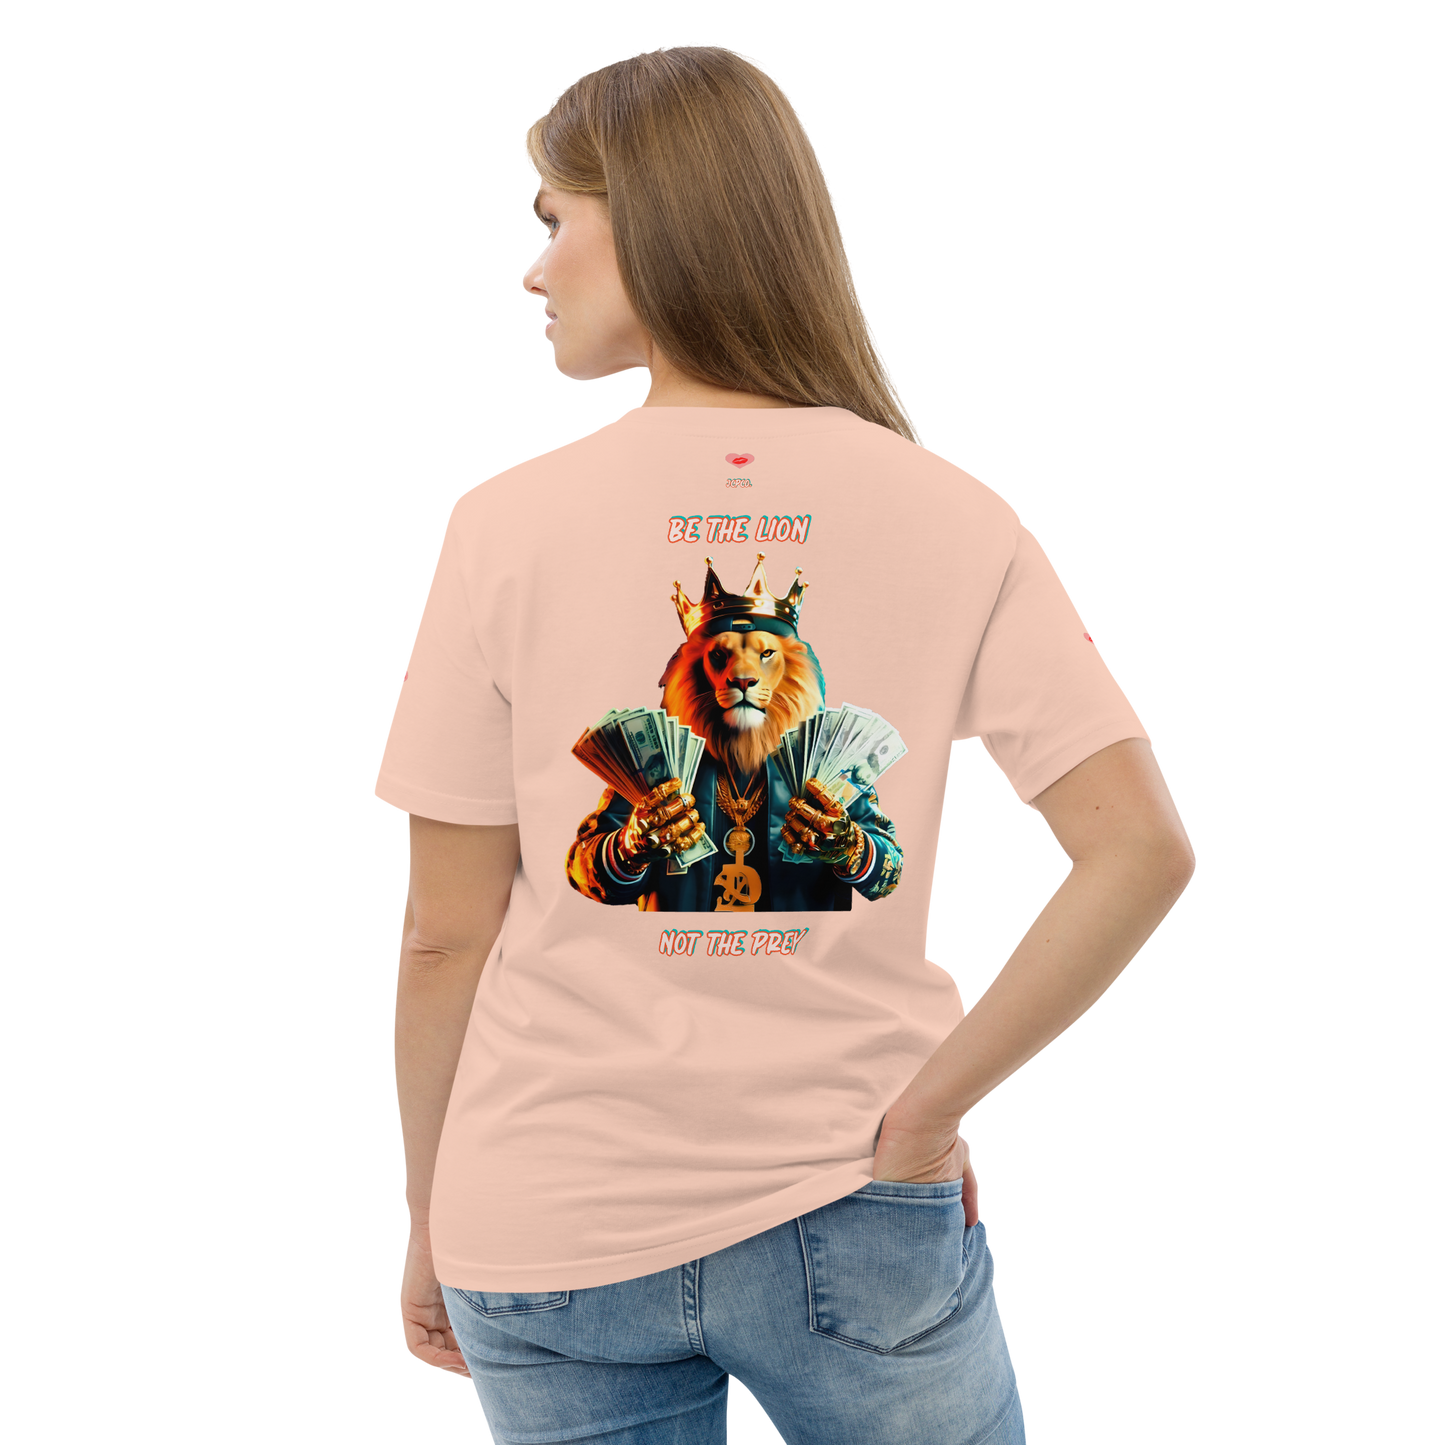 👑🦁In the Jungle of Life, Be the Lion, 🦁👑 Not the Prey 👀Unisex organic cotton t-shirt 👕